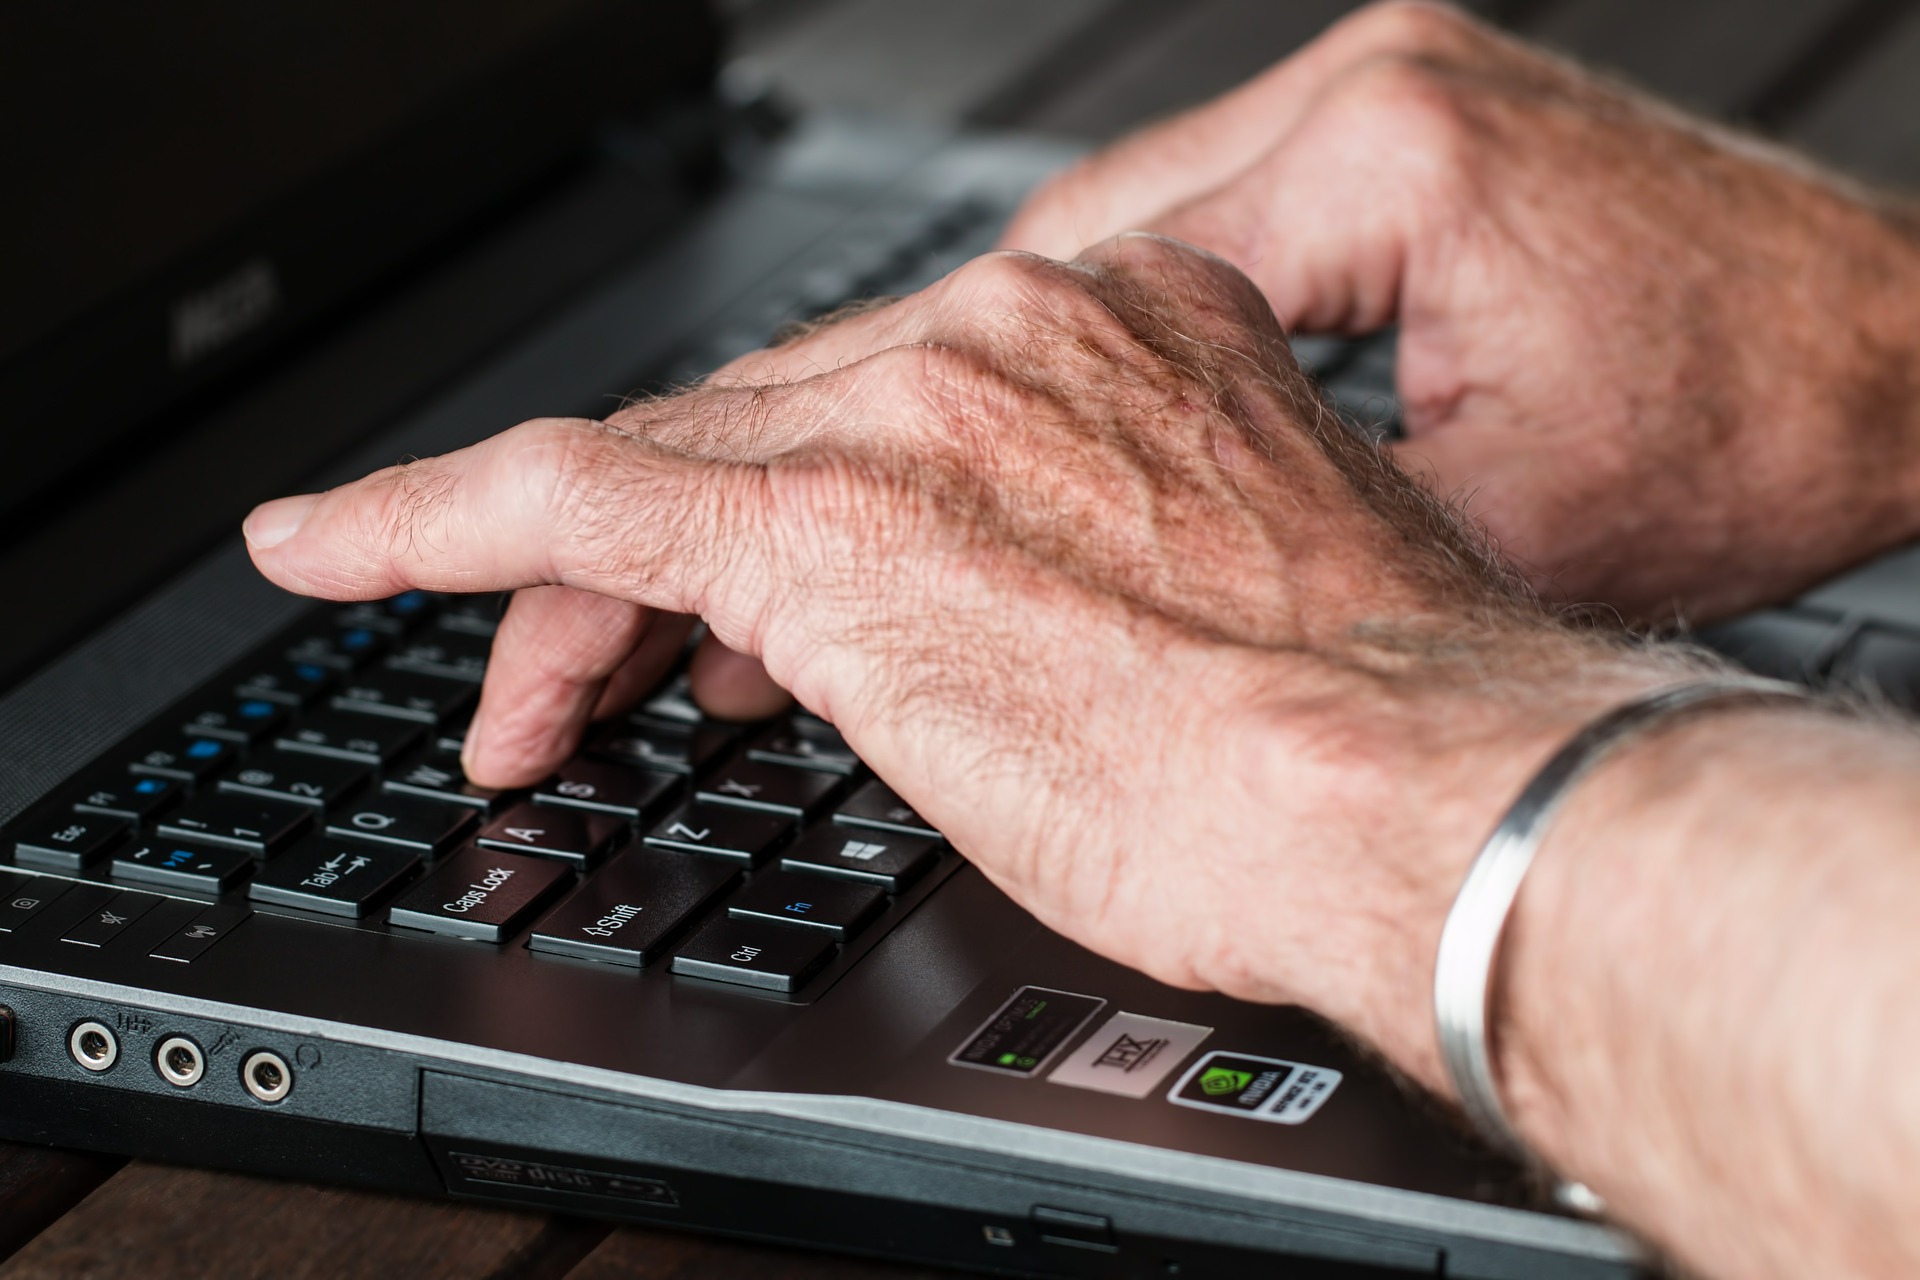 old person hands typing at a laptop in close-up